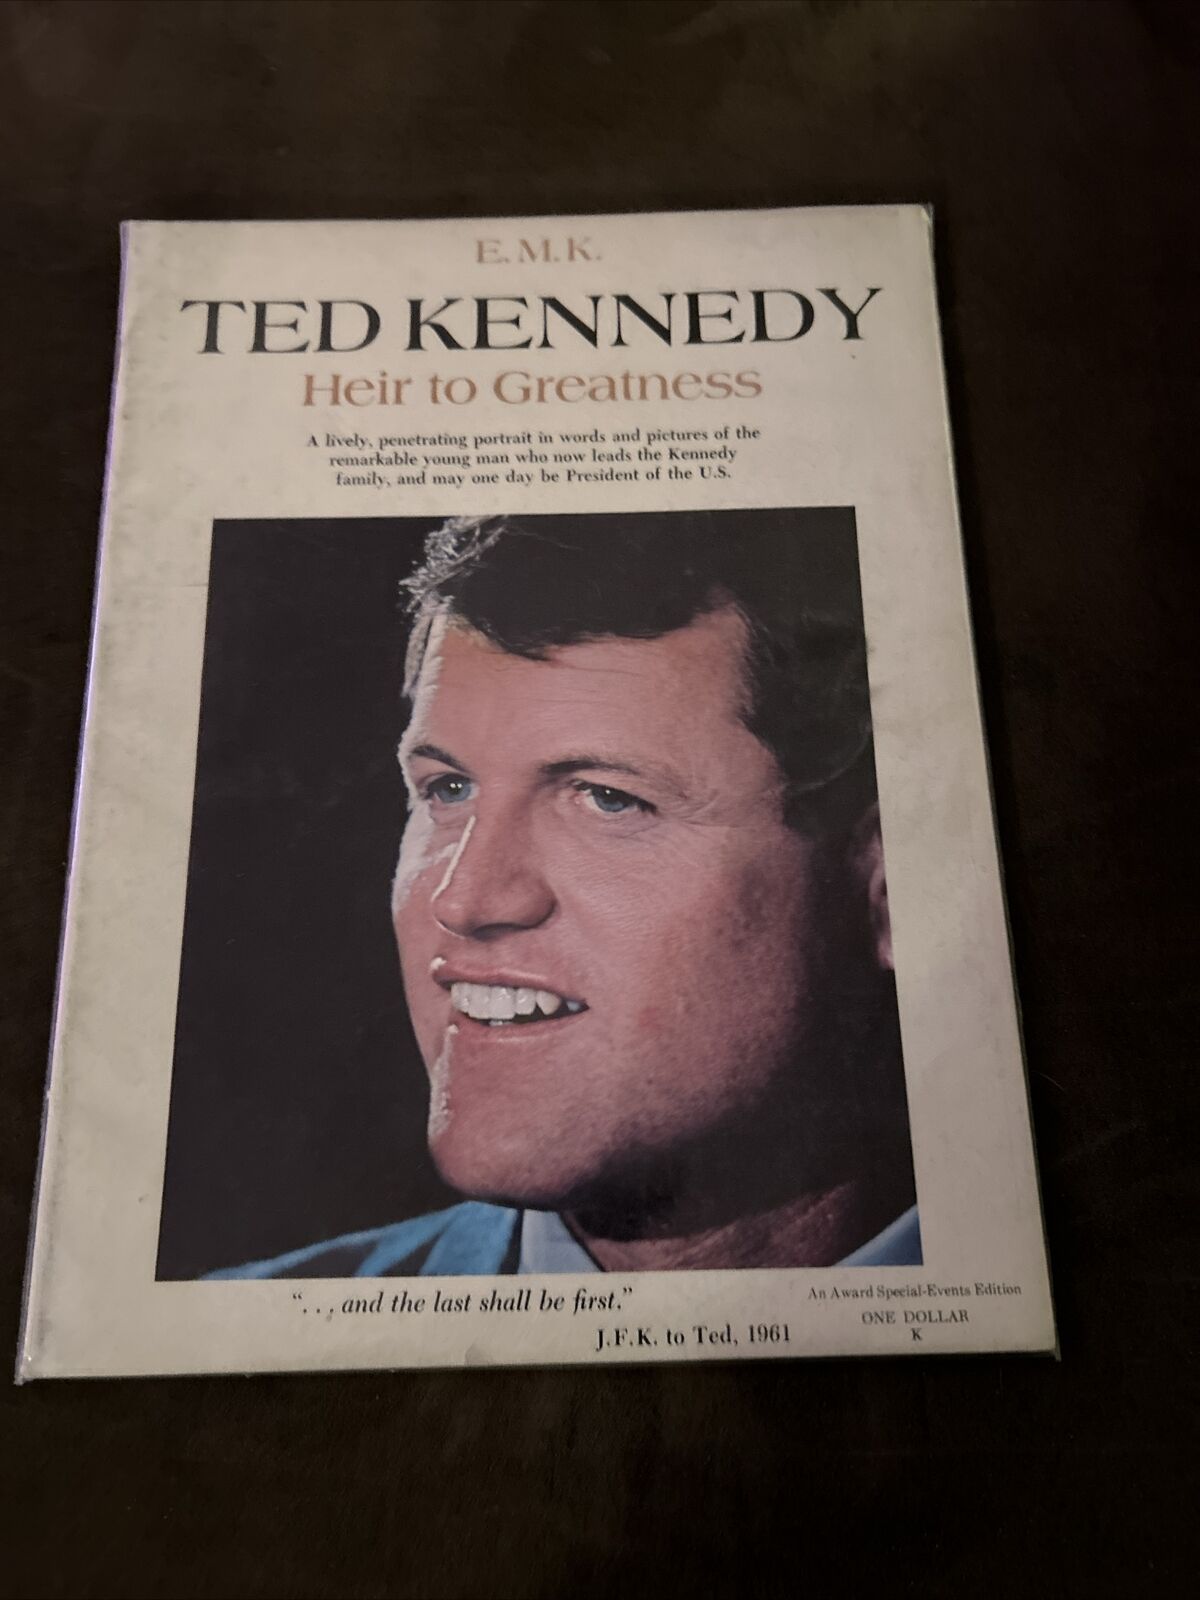 Ted Kennedy Heir to Greatness Magazine, 1968, An Awards Special Events Edition